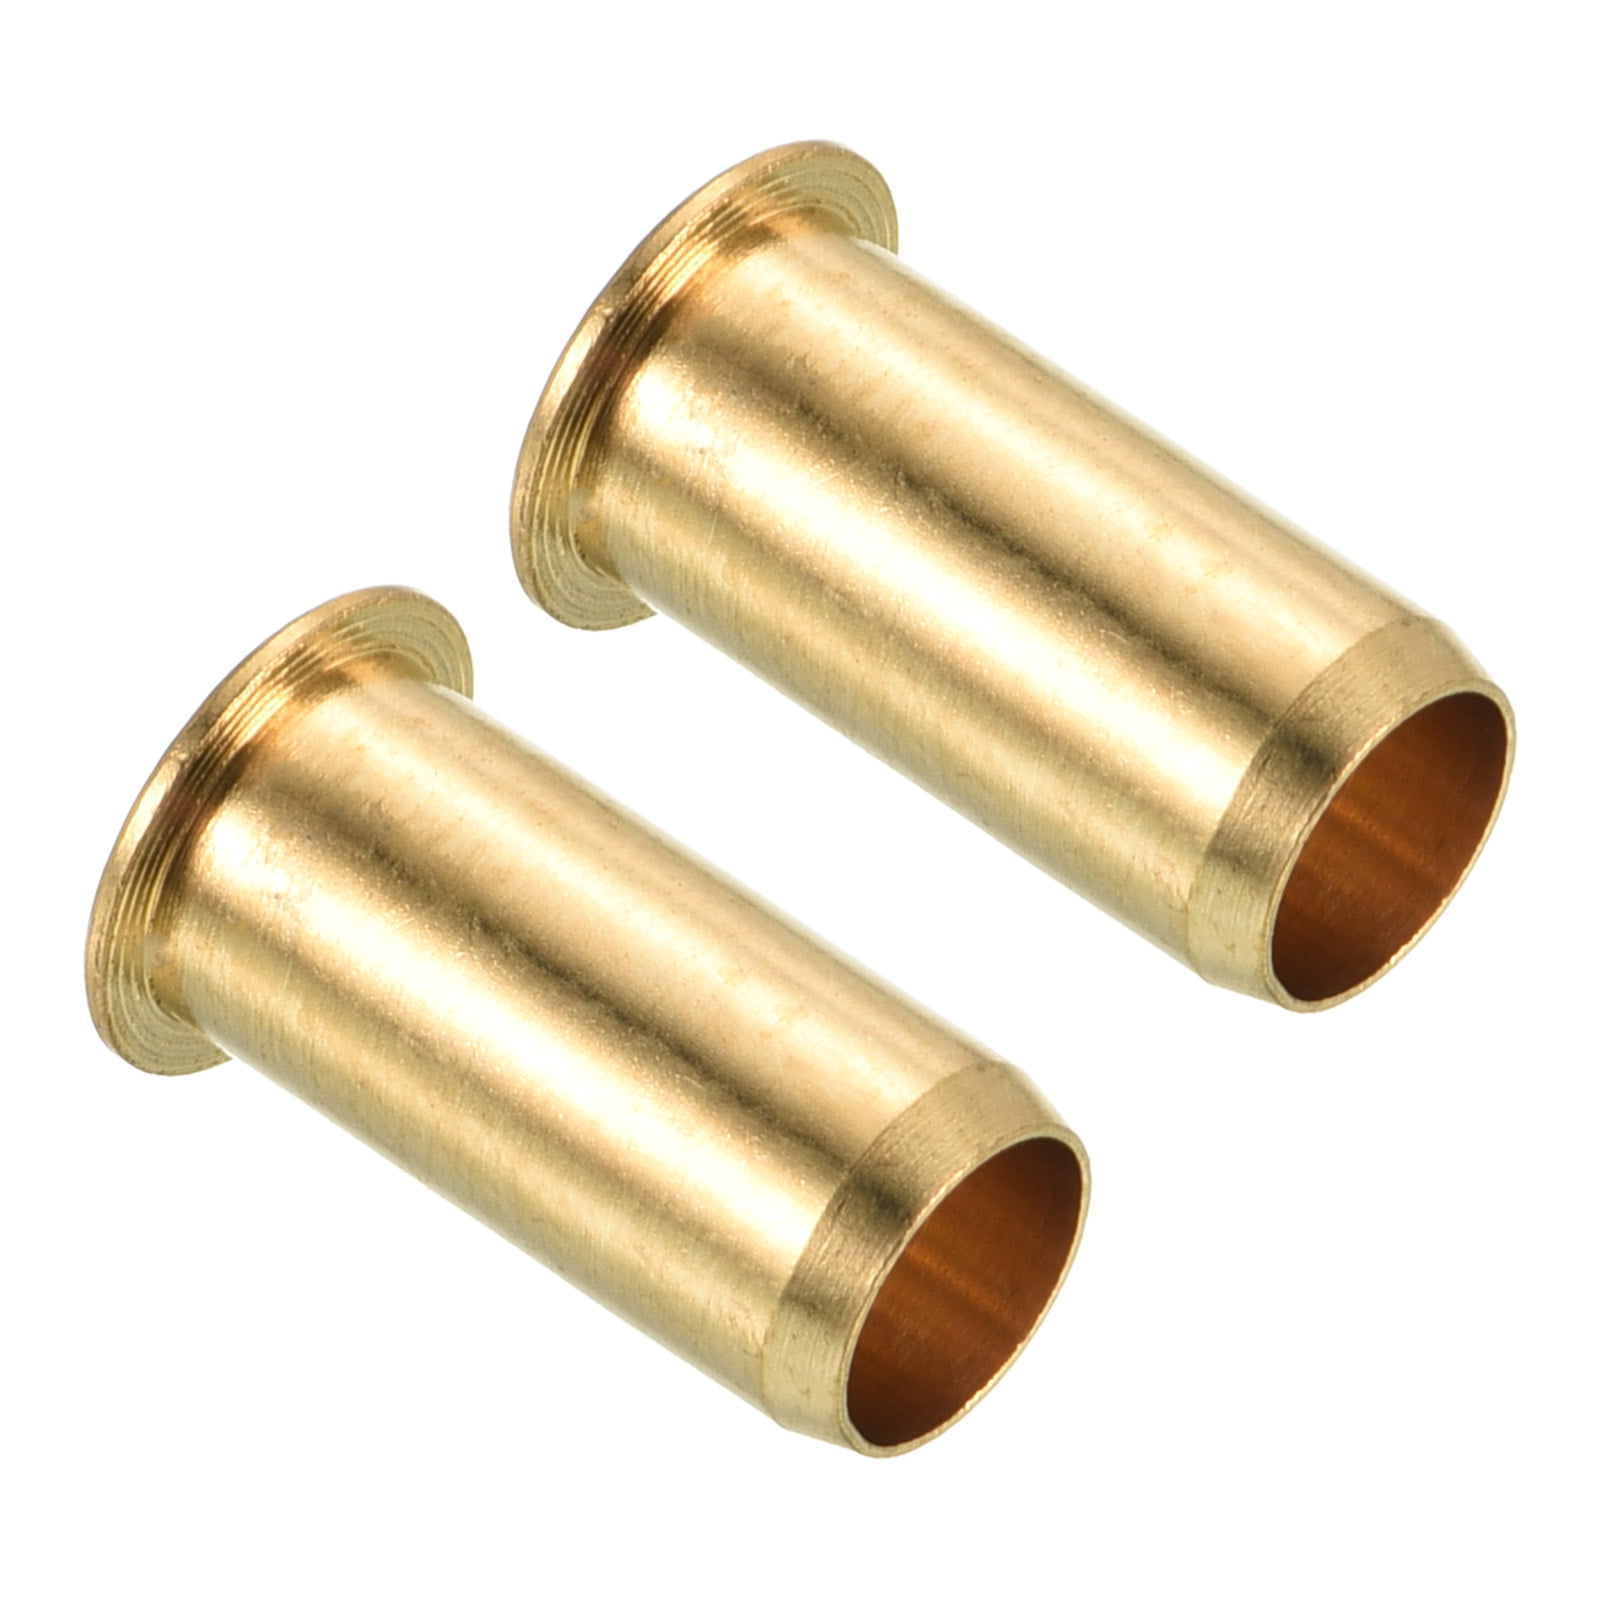 Uxcell 6mm Tube Brass Compression Fittings, 2 Pack Insert